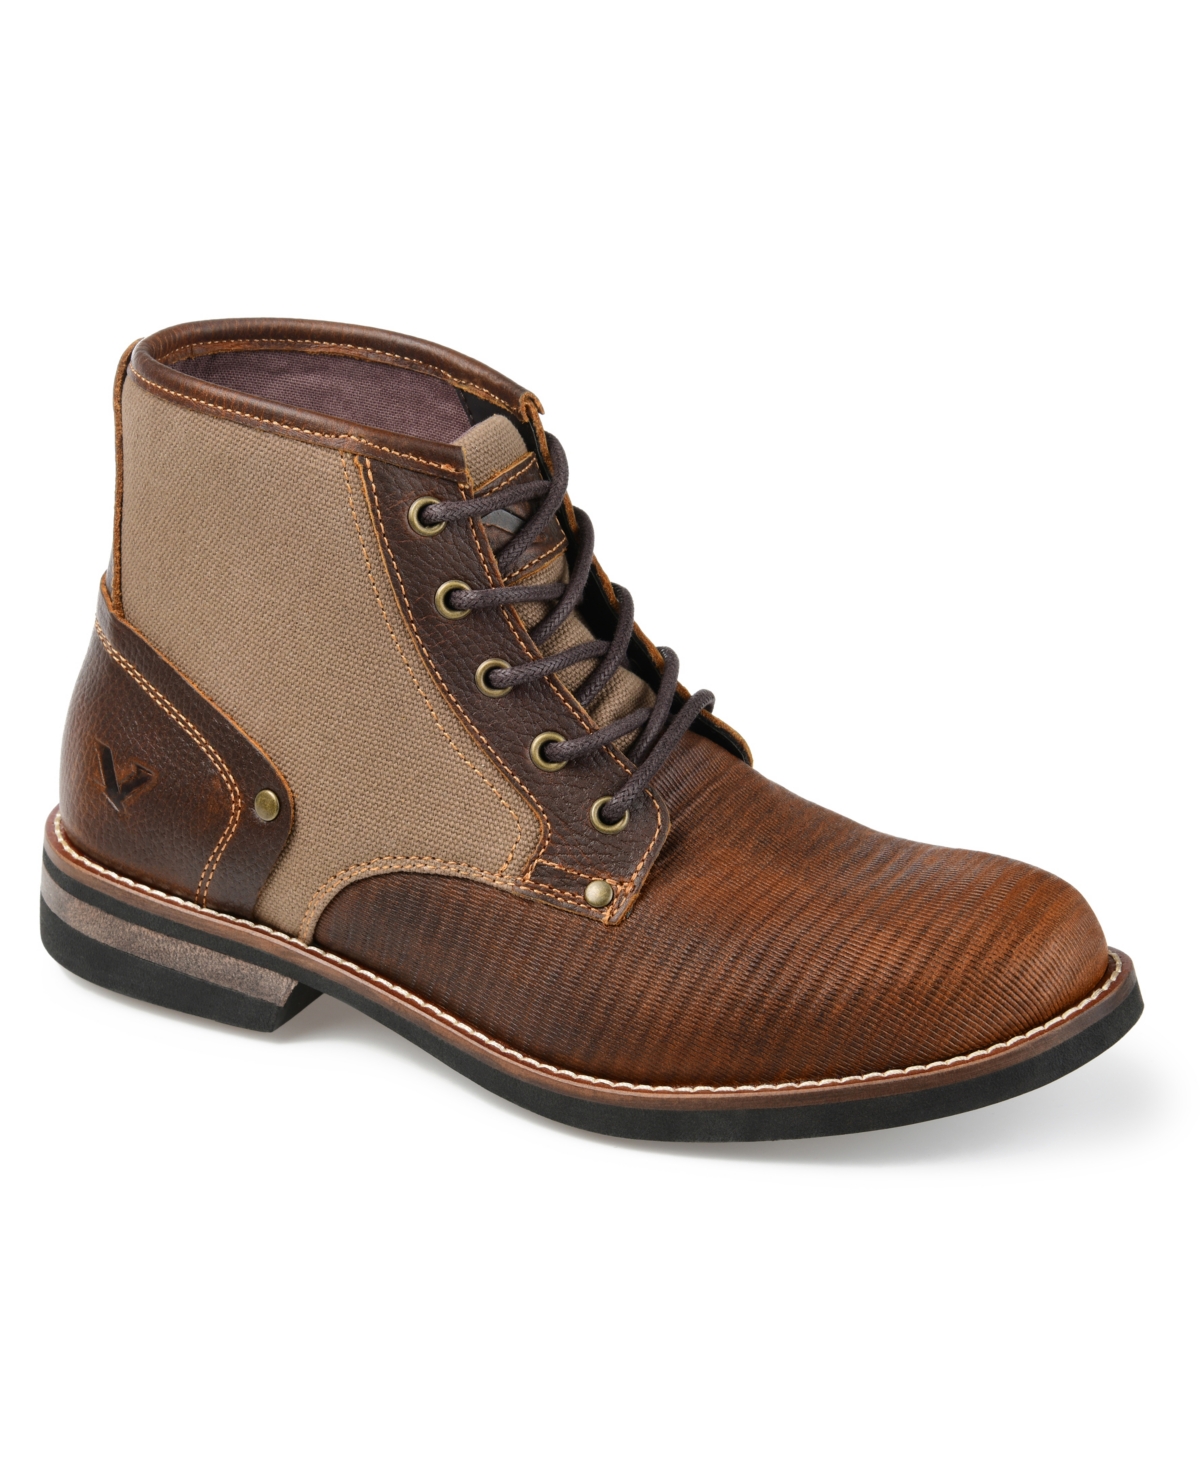 Men's Summit Ankle Boot - Brown